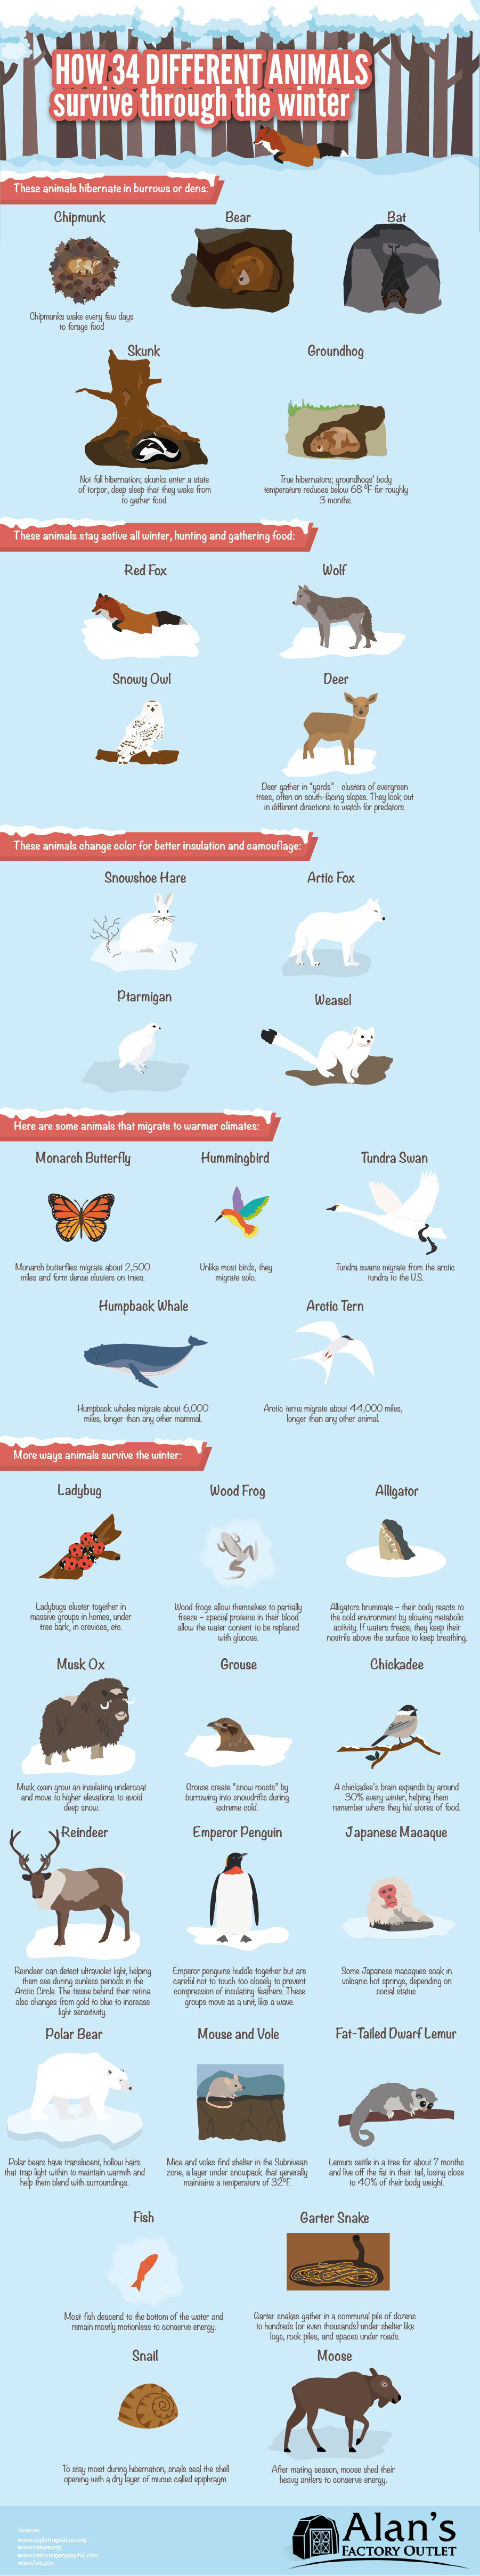 how-34-different-animals-survive-through-the-winter-3.png